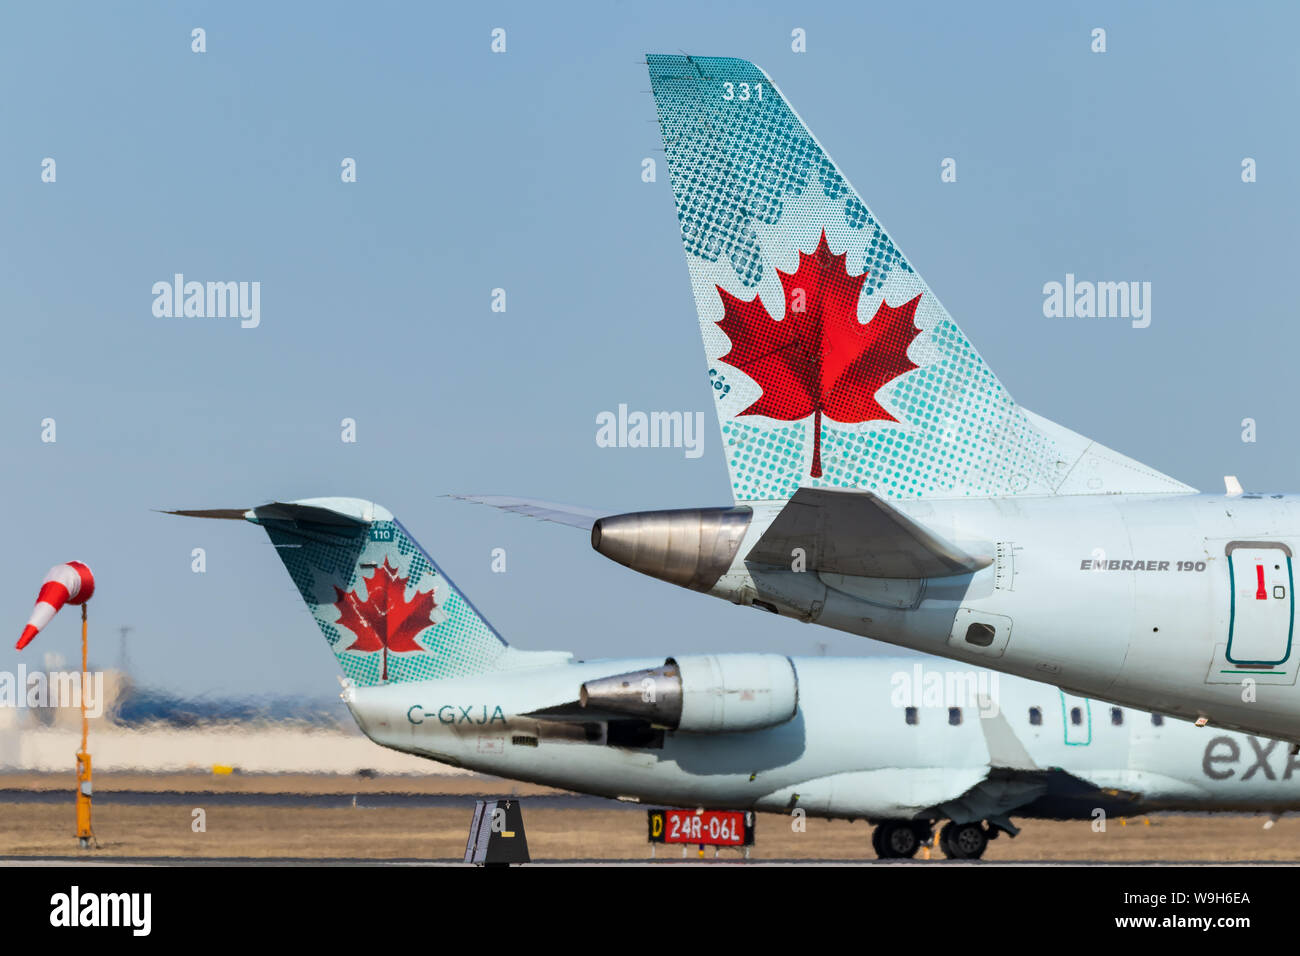 Air Canada tails seen while holding for takeoff at Toronto Pearson Intl. Airport. Stock Photo